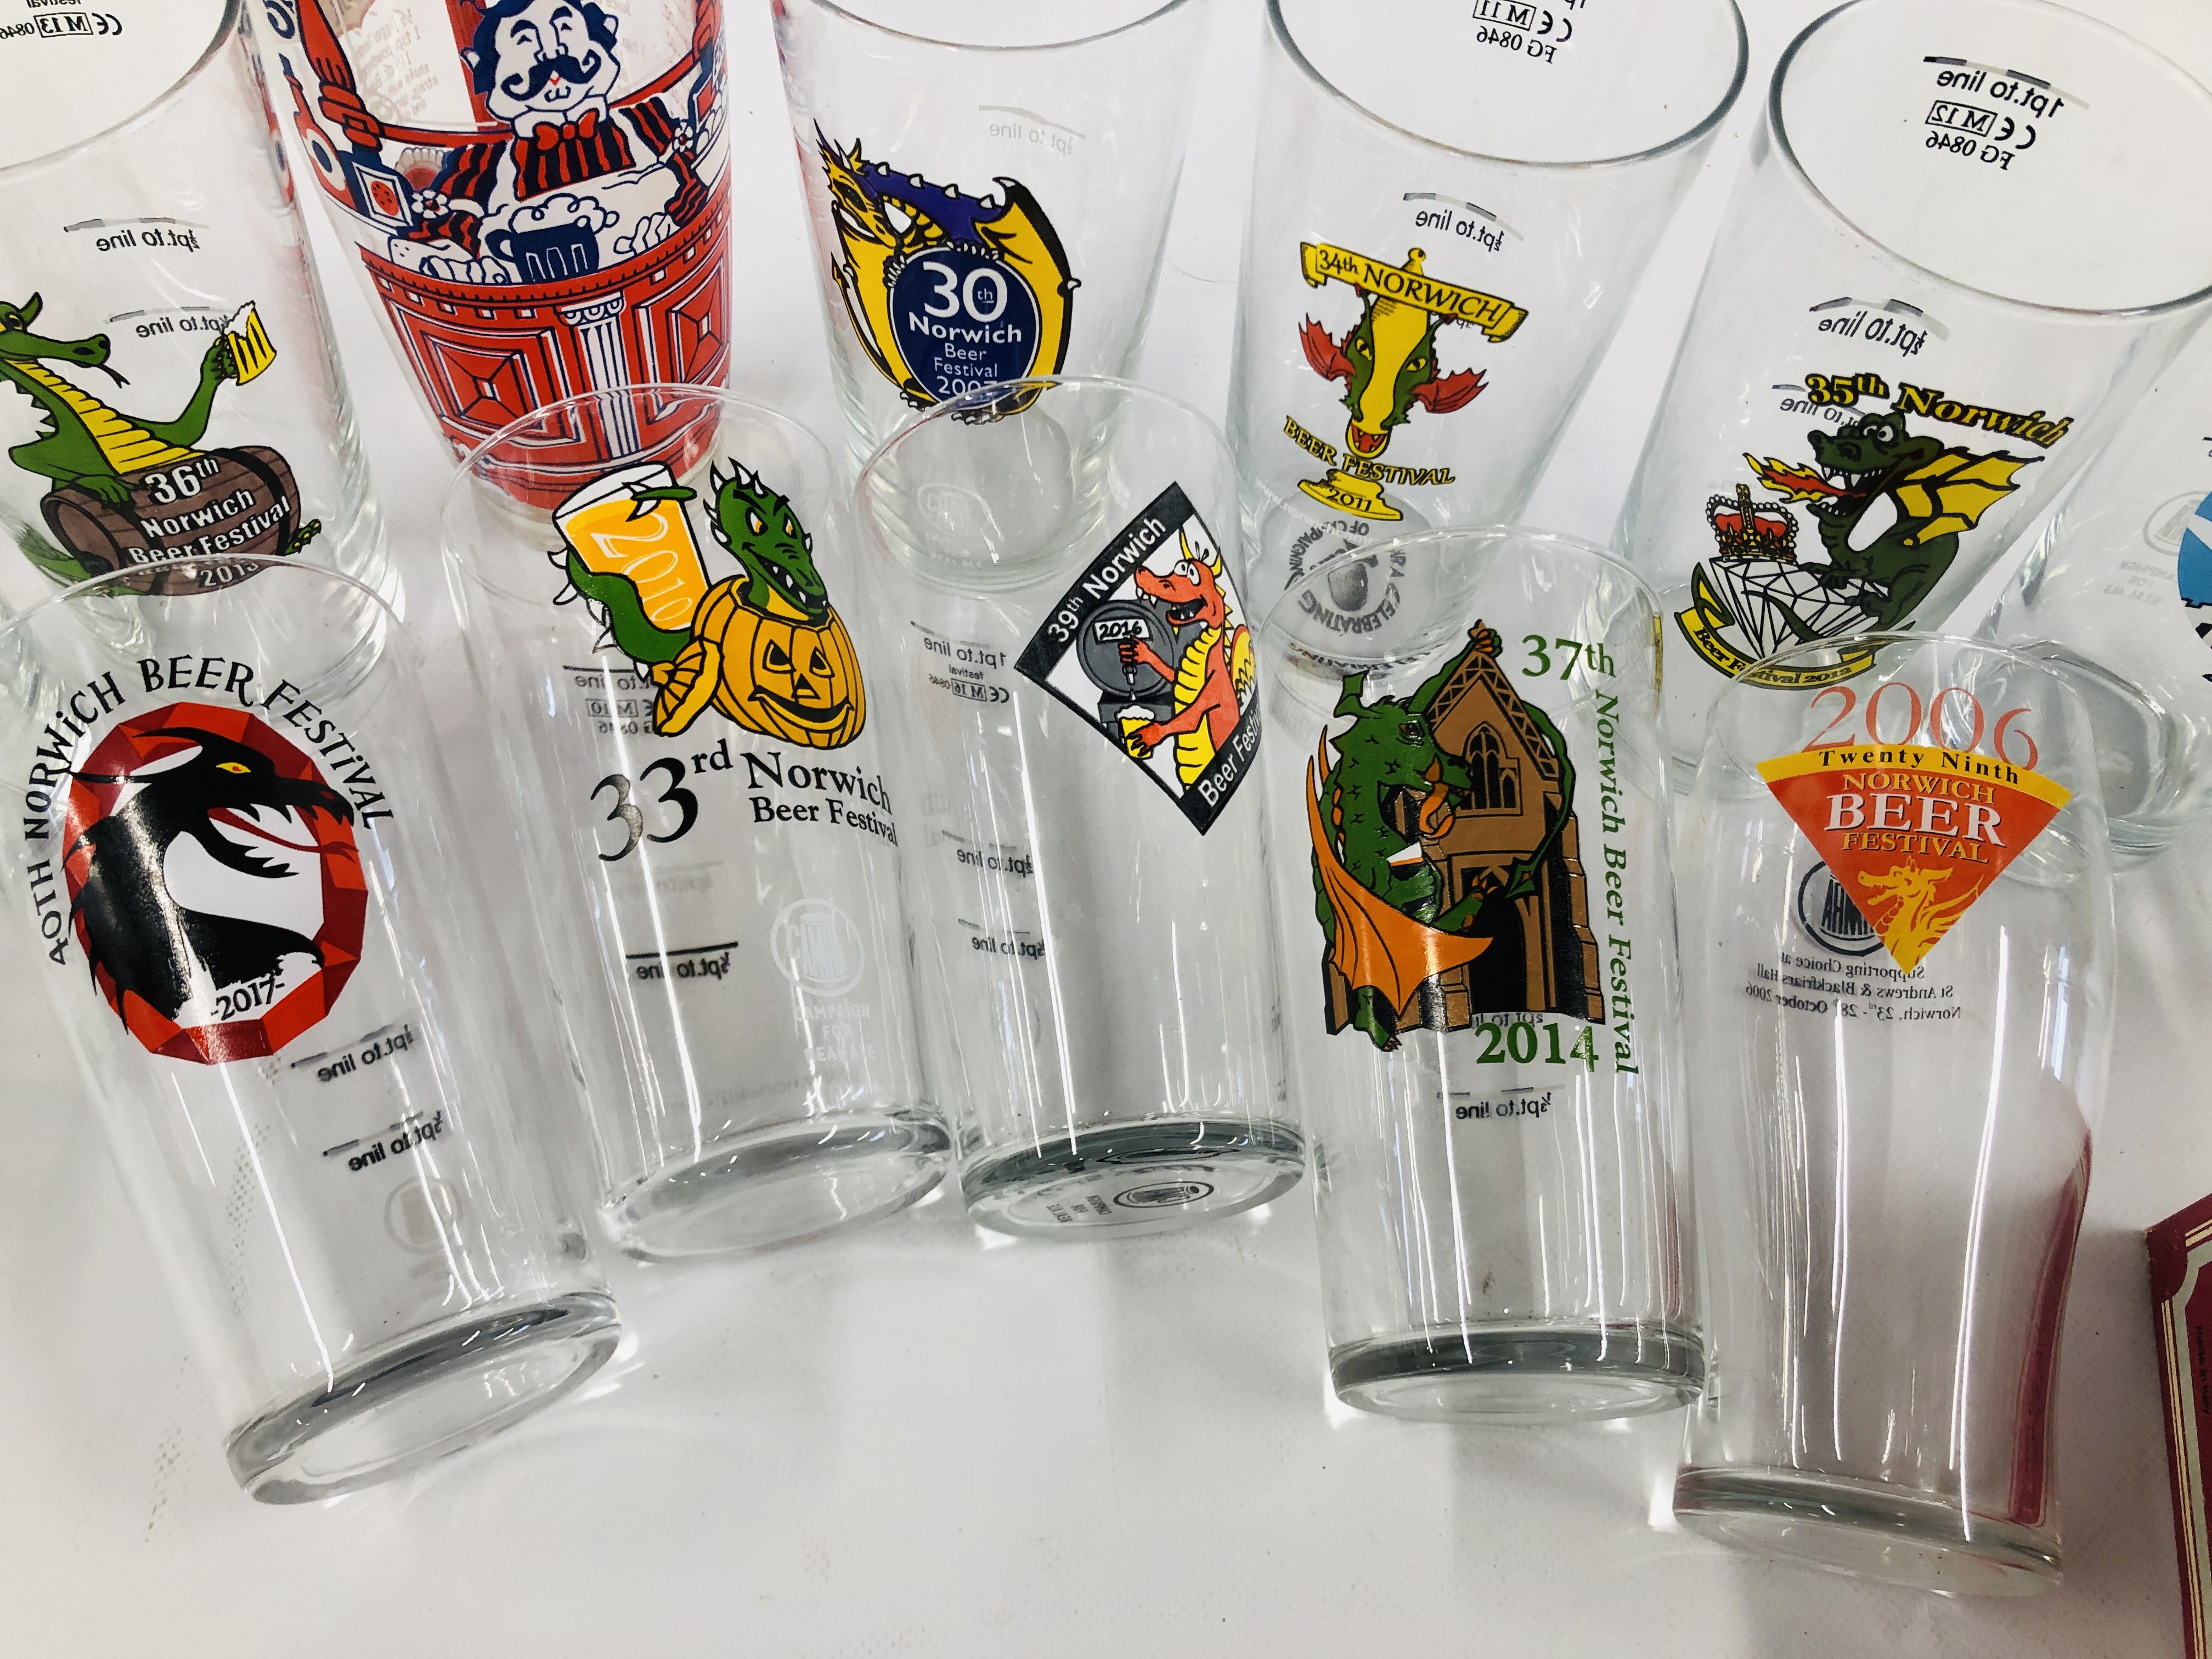 A COLLECTION OF 13 NORWICH BEER FESTIVAL GLASSES ALONG WITH A VINTAGE BOXED SET "BAR BELLES - Image 5 of 7